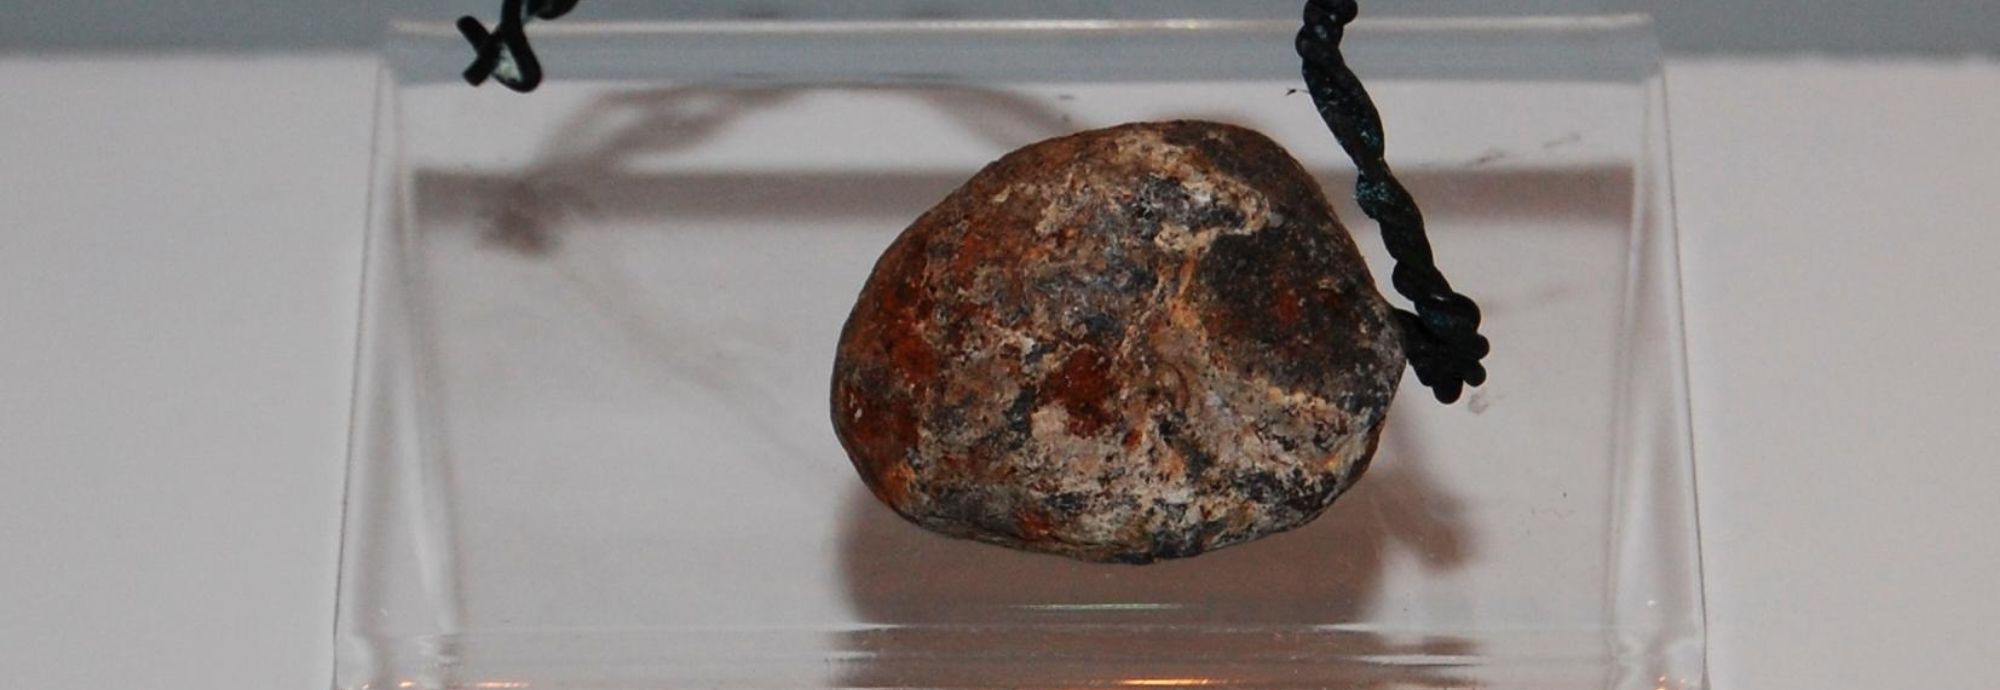 A photo of a lead grape shot recovered from the Hanover wreck. Pictured on a white surface.